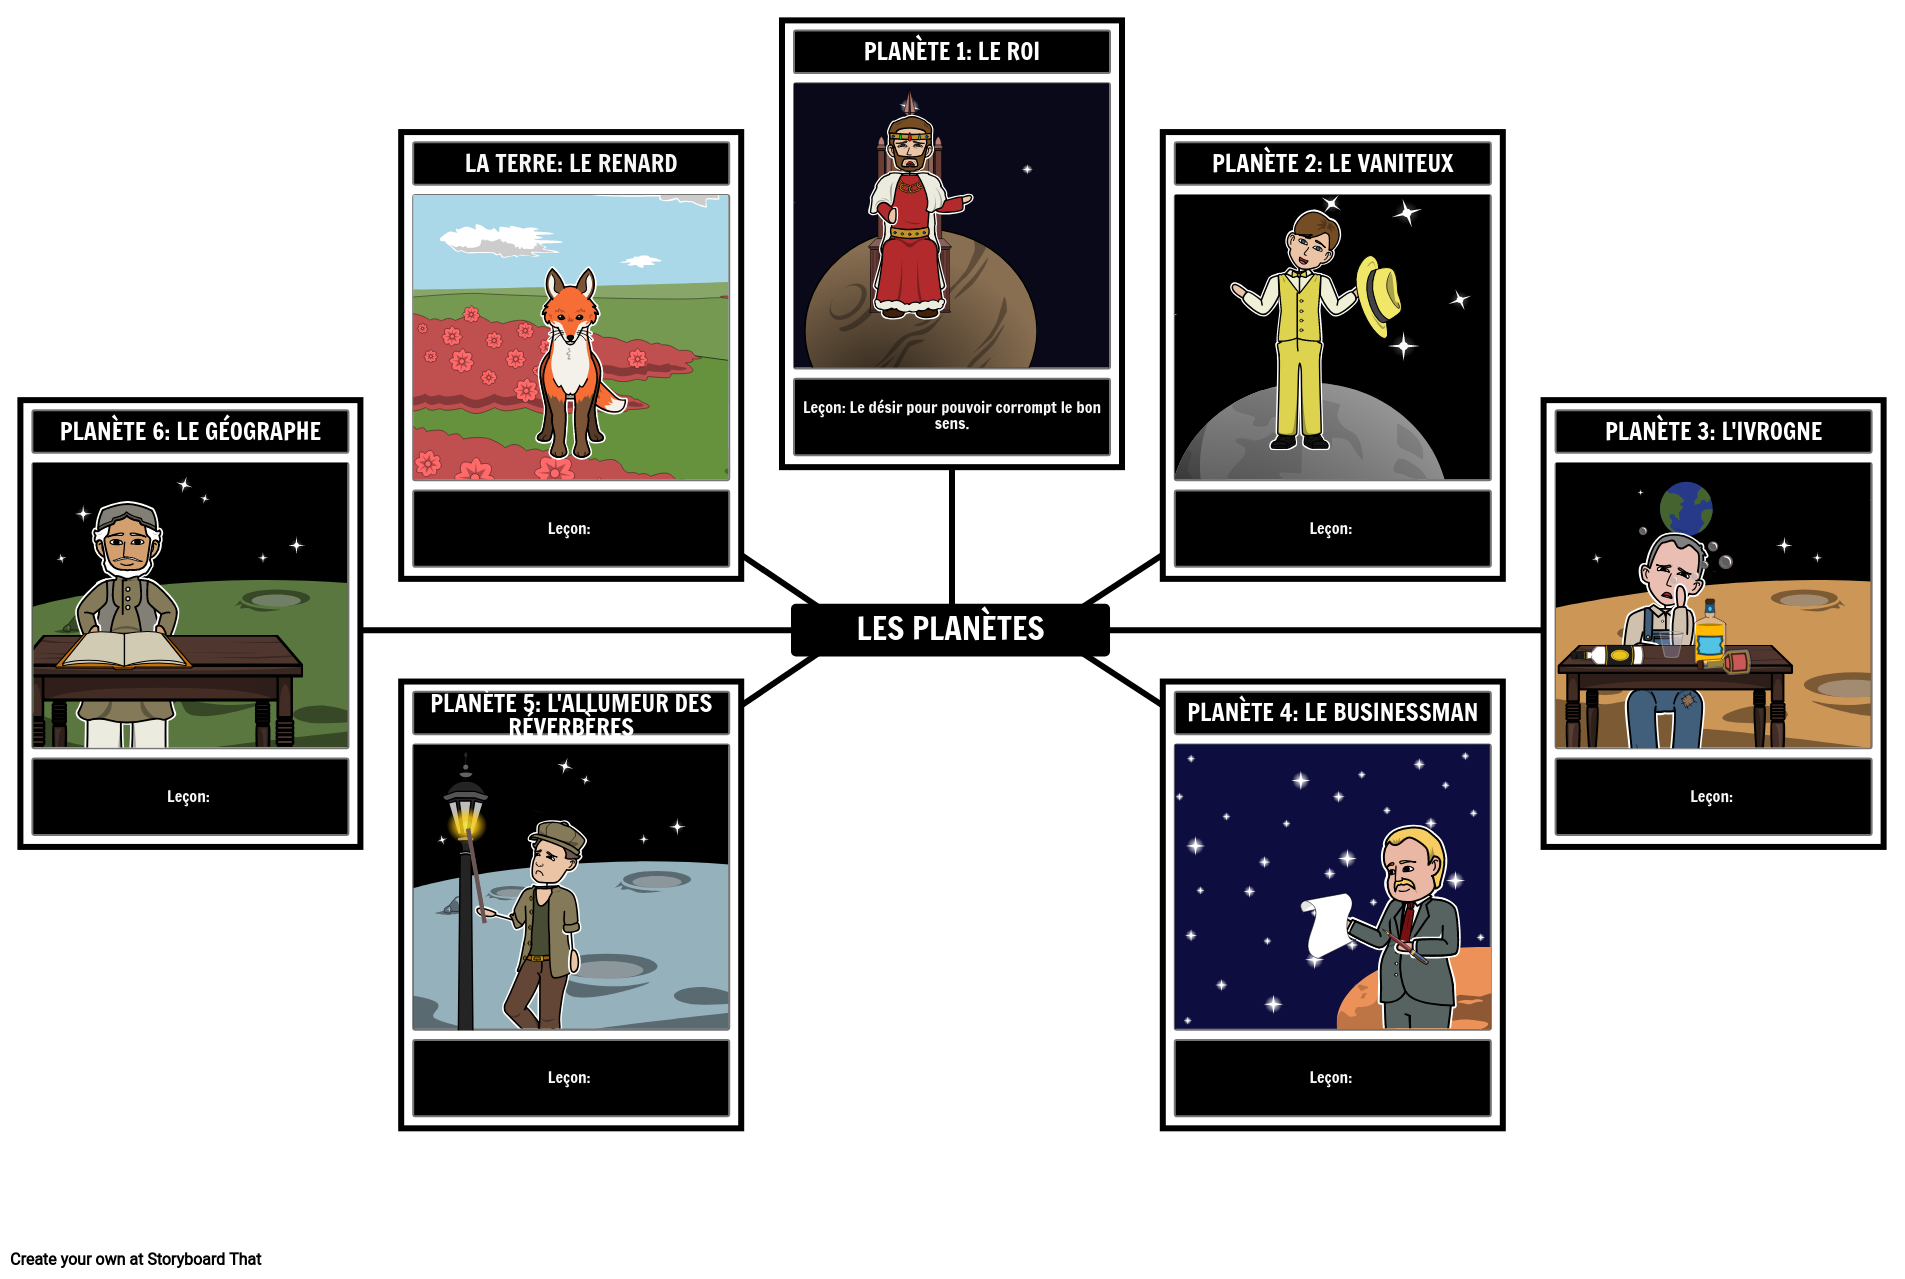 Le Petit Prince Planets and Lessons